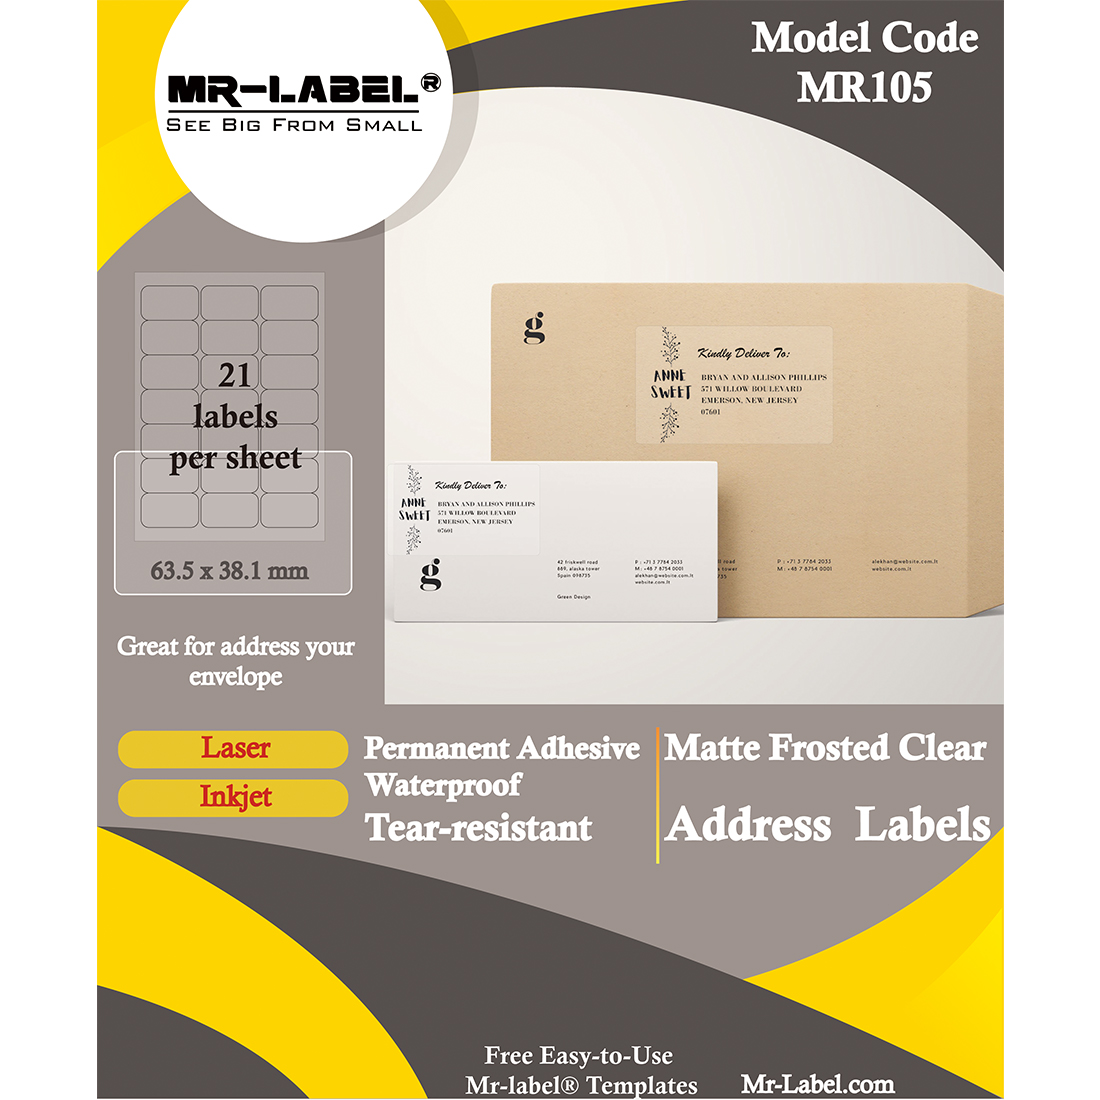 Mr-Label Waterproof Removable Adhesive Labels - A4 Sheet - Tear-Resistant  stickers for Kitchen use | Mailing Label - Laser Printer Only